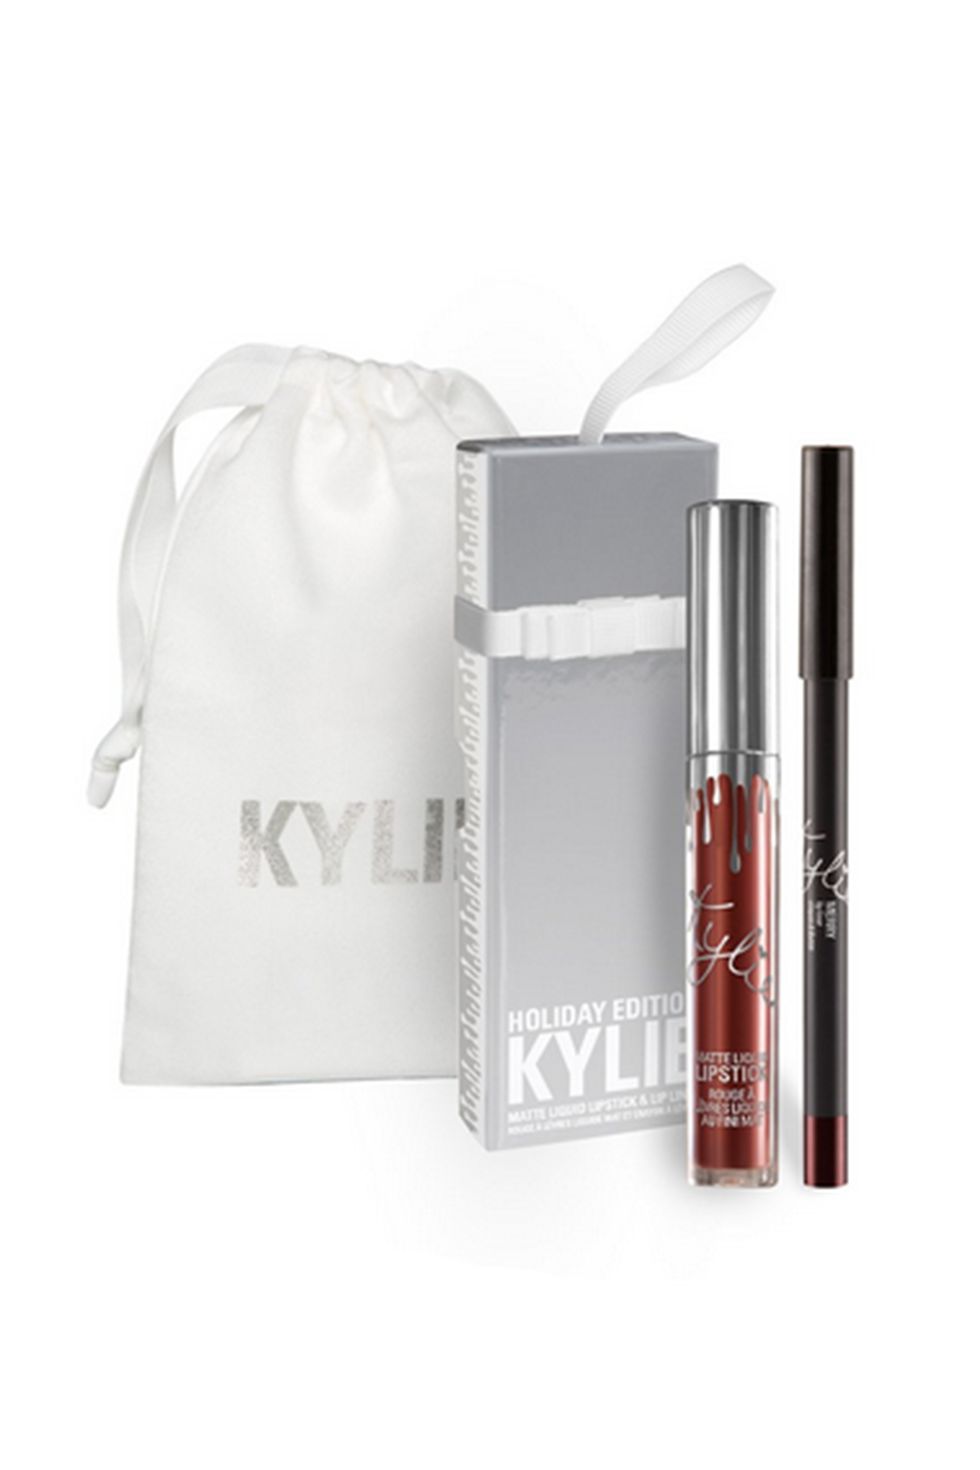 <p>In the viral beauty wars that were 2016, Kylie was, well, you know, king. While all her launches have been met with similar fervor, the lip kit craze hit peak Google search volume and crashed her site in late March, just as she restocked her shades for the second time. </p><p><em data-verified="redactor" data-redactor-tag="em">Kylie Cosmetics Matte Liquid Lip Kit</em><span class="redactor-invisible-space" data-verified="redactor" data-redactor-tag="span" data-redactor-class="redactor-invisible-space">,&nbsp;<em data-verified="redactor" data-redactor-tag="em">$29;&nbsp;<a href="https://www.kyliecosmetics.com/collections/matte-lip-kits-gift-bag" data-tracking-id="recirc-text-link">kyliecosmetics.com</a></em></span><br></p>